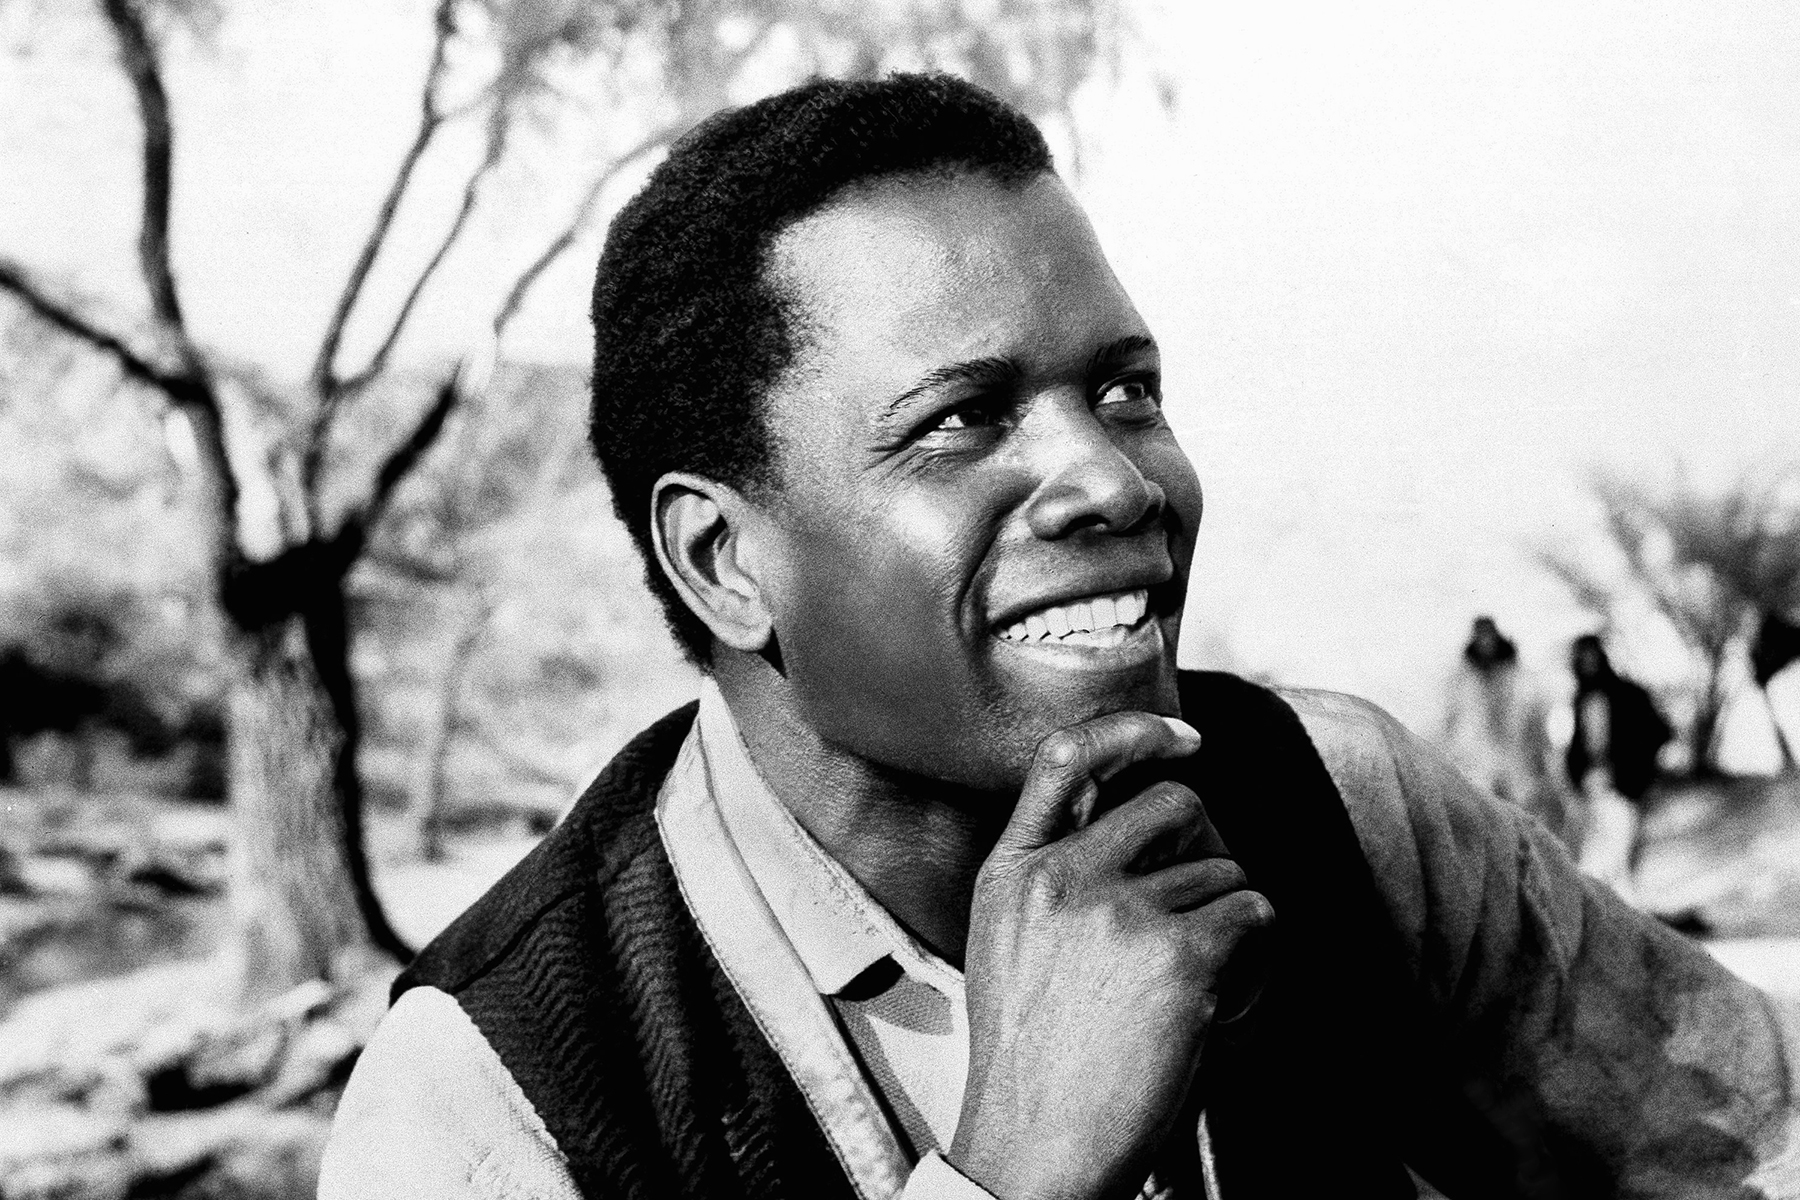 Sidney Poitier, Oscar-Winning Actor and Activist Who Made History, Dead at 94